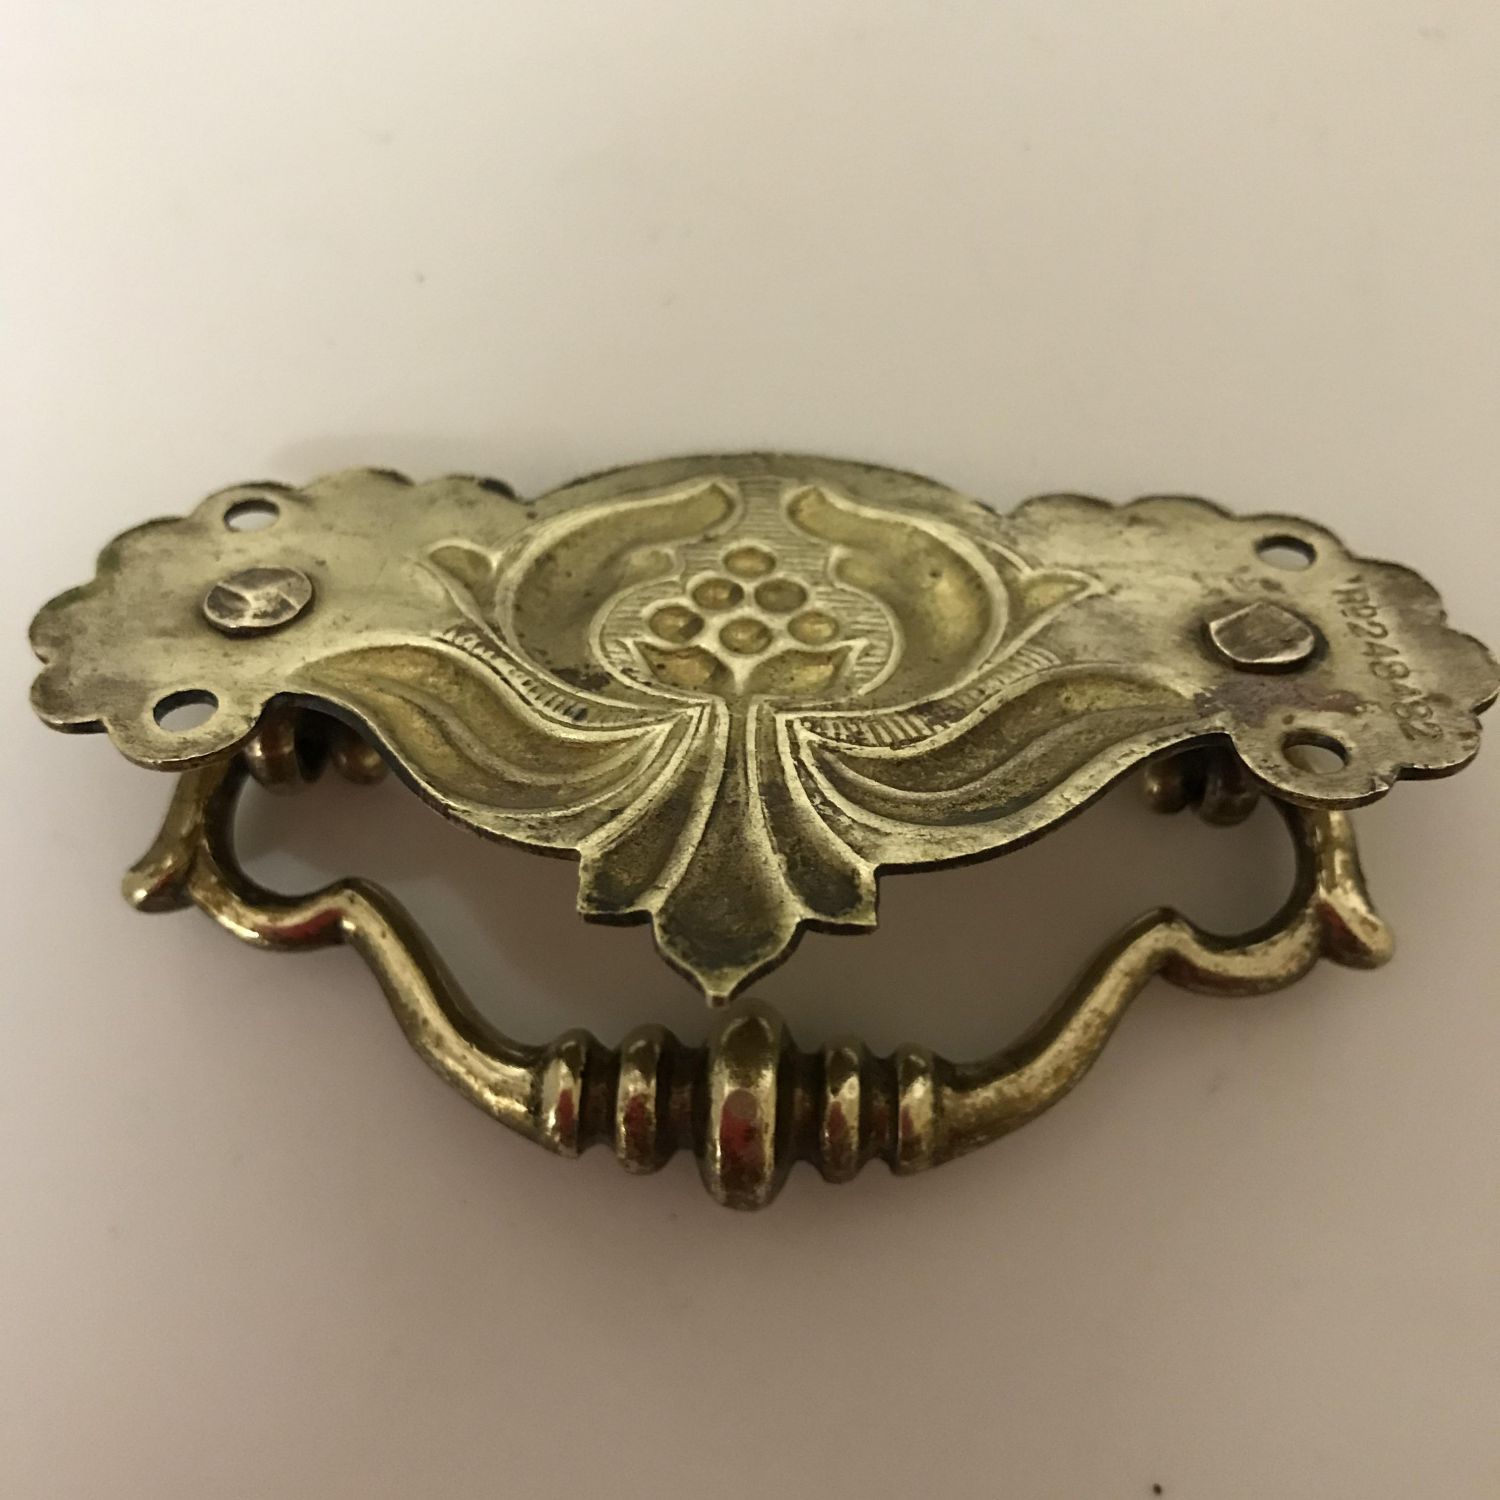 Set of 6 Art Nouveau Brass Drawer Handles circa 1900 Gifts for Every